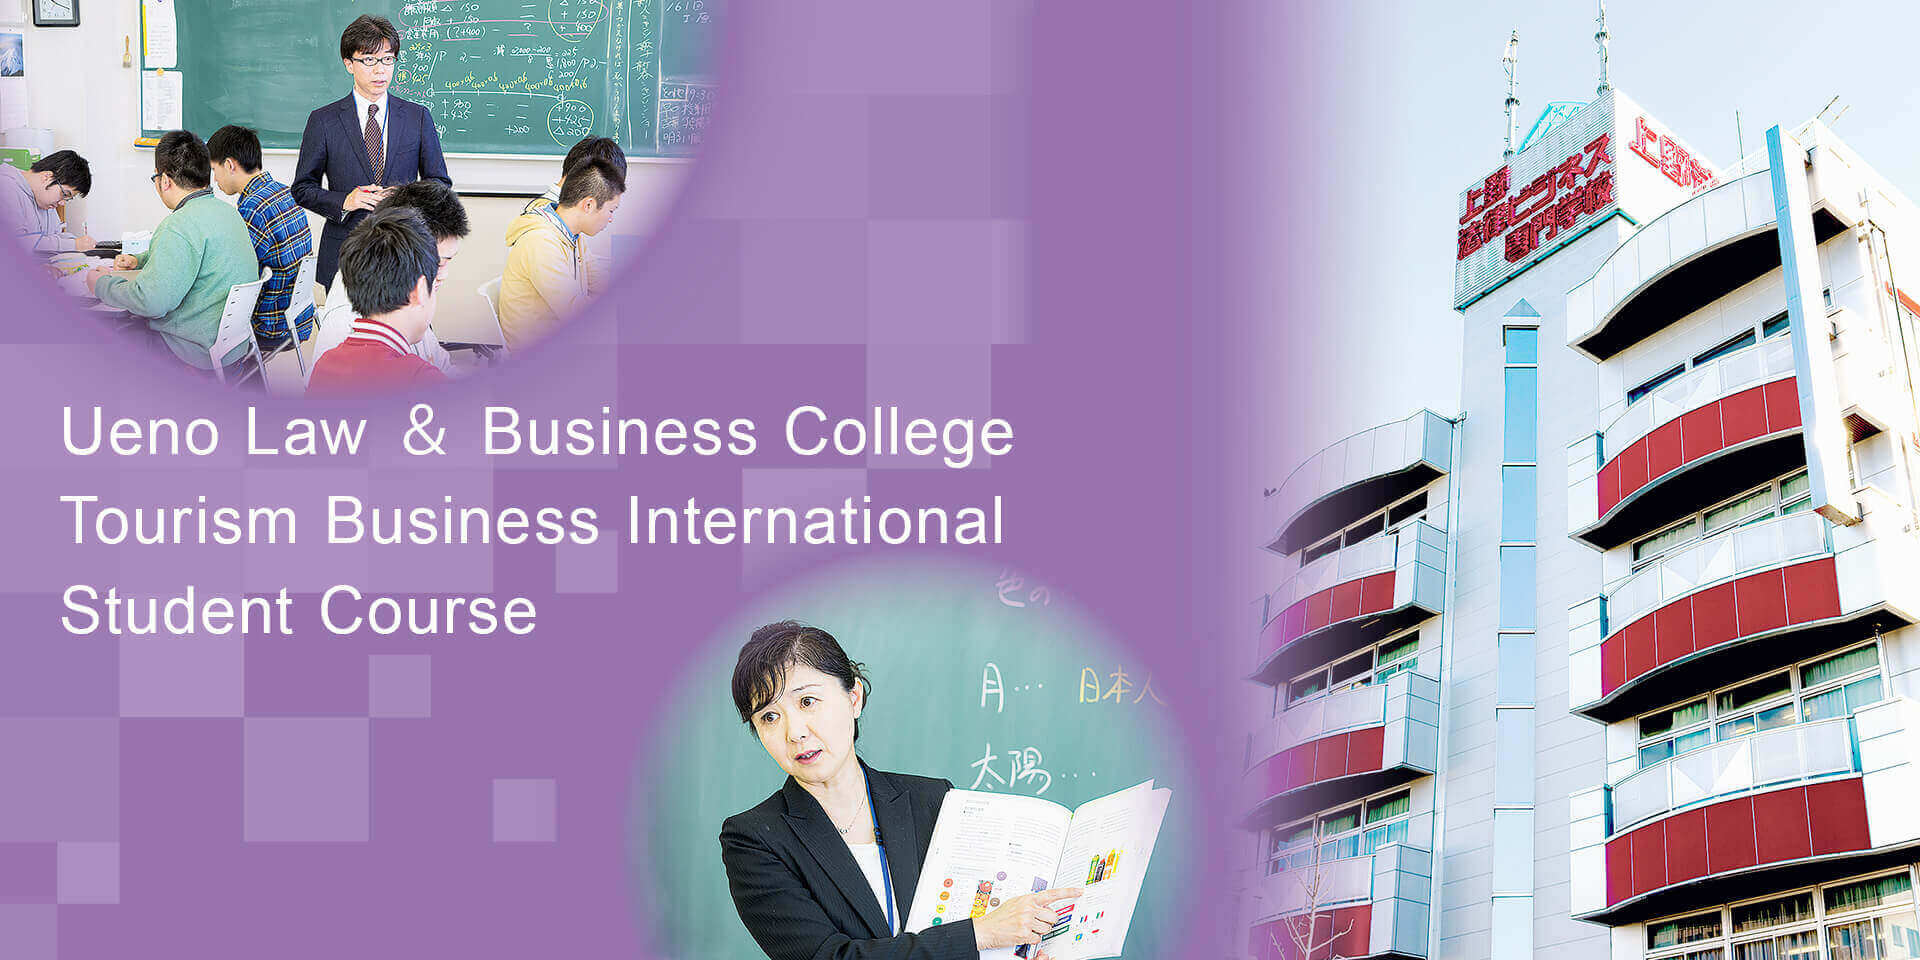 Ueno Law & Business College Tourism Business International Student Course